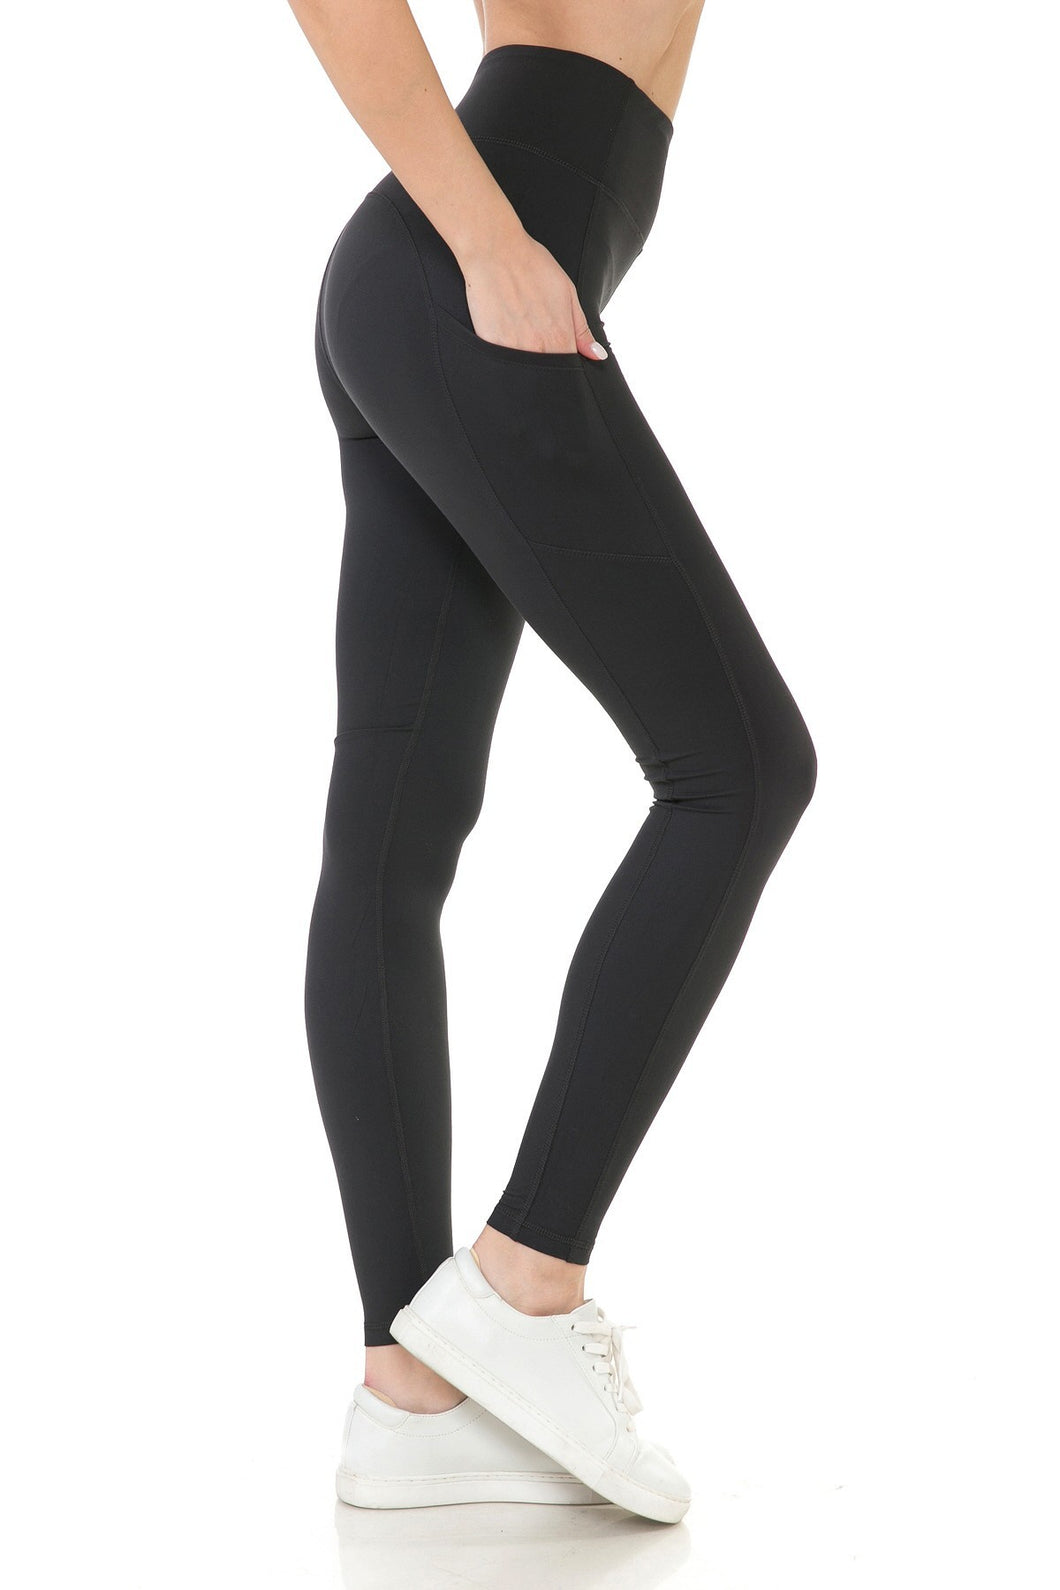 Perfect Fit Pocketed Leggings - 5